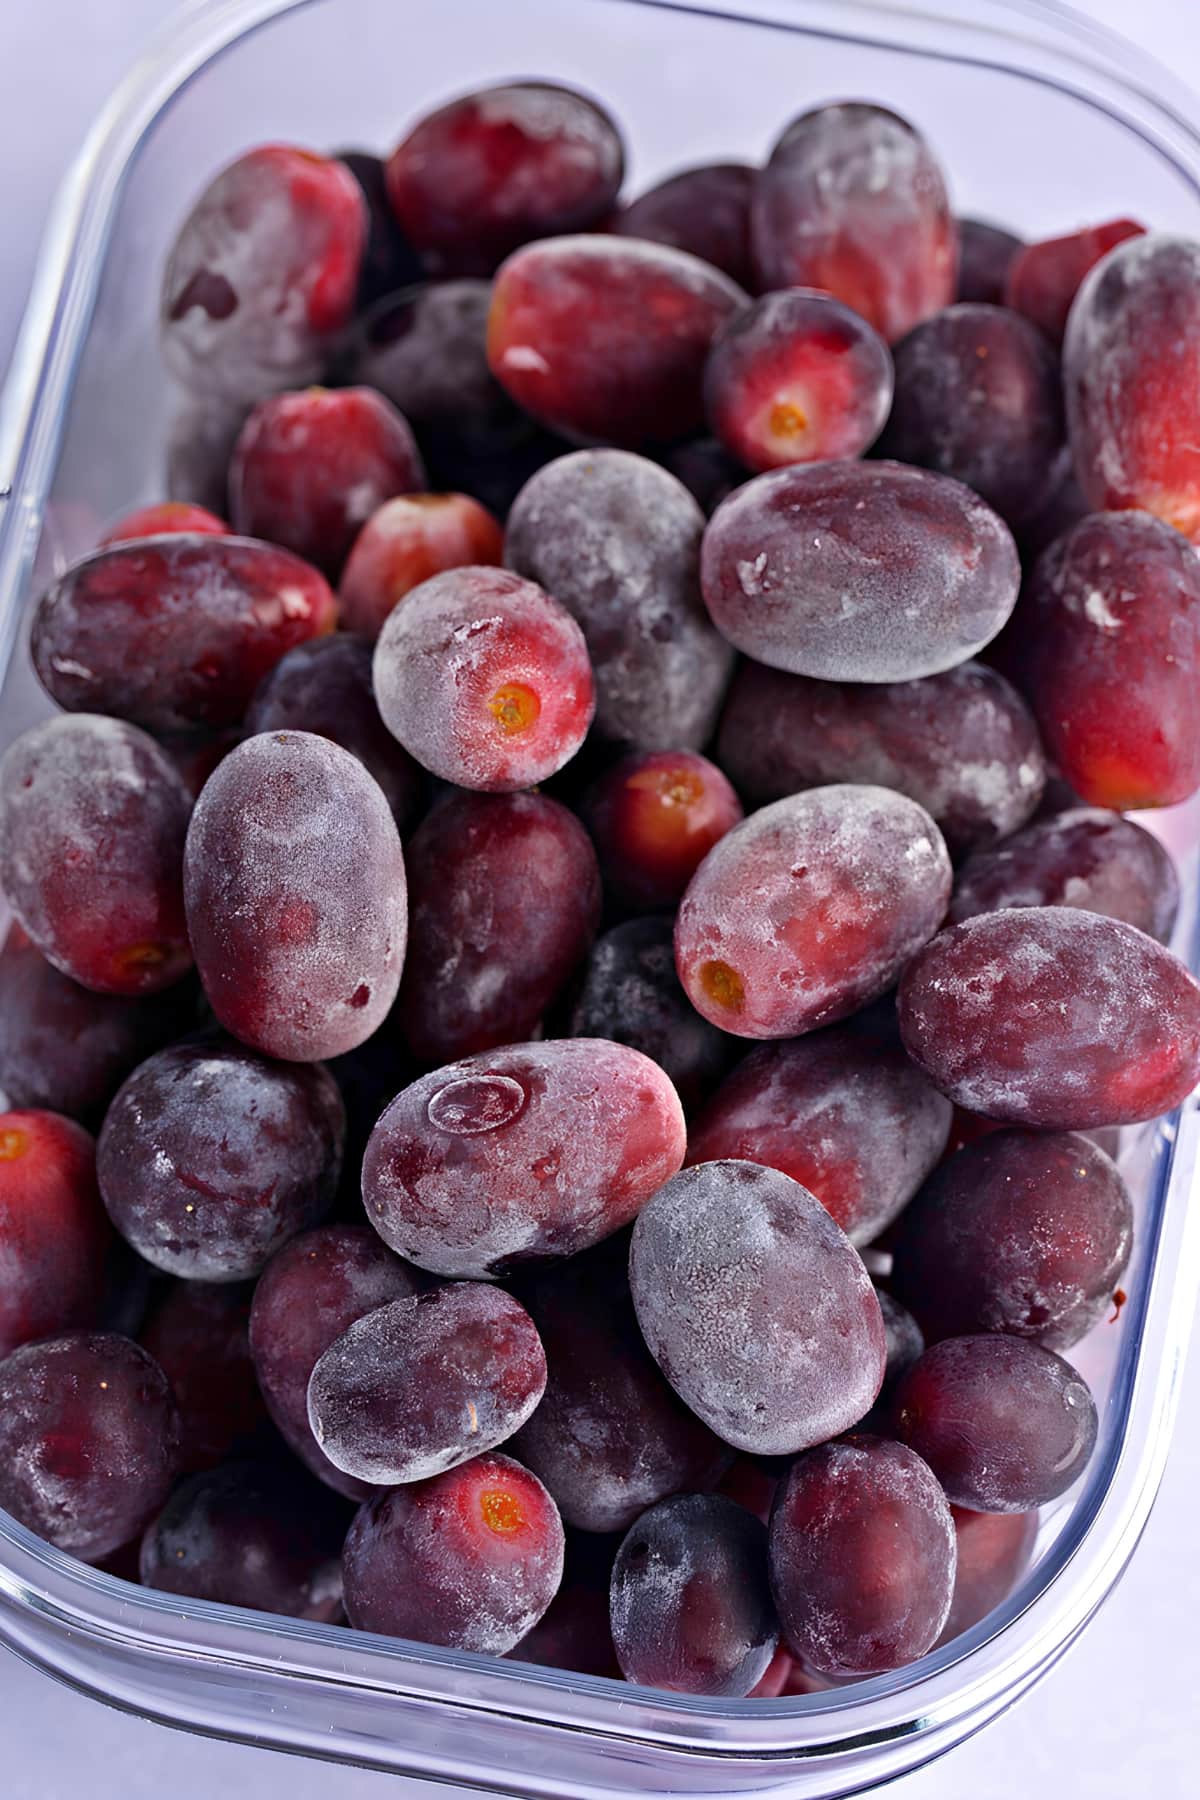 Frozen Grapes on a Plastic Container